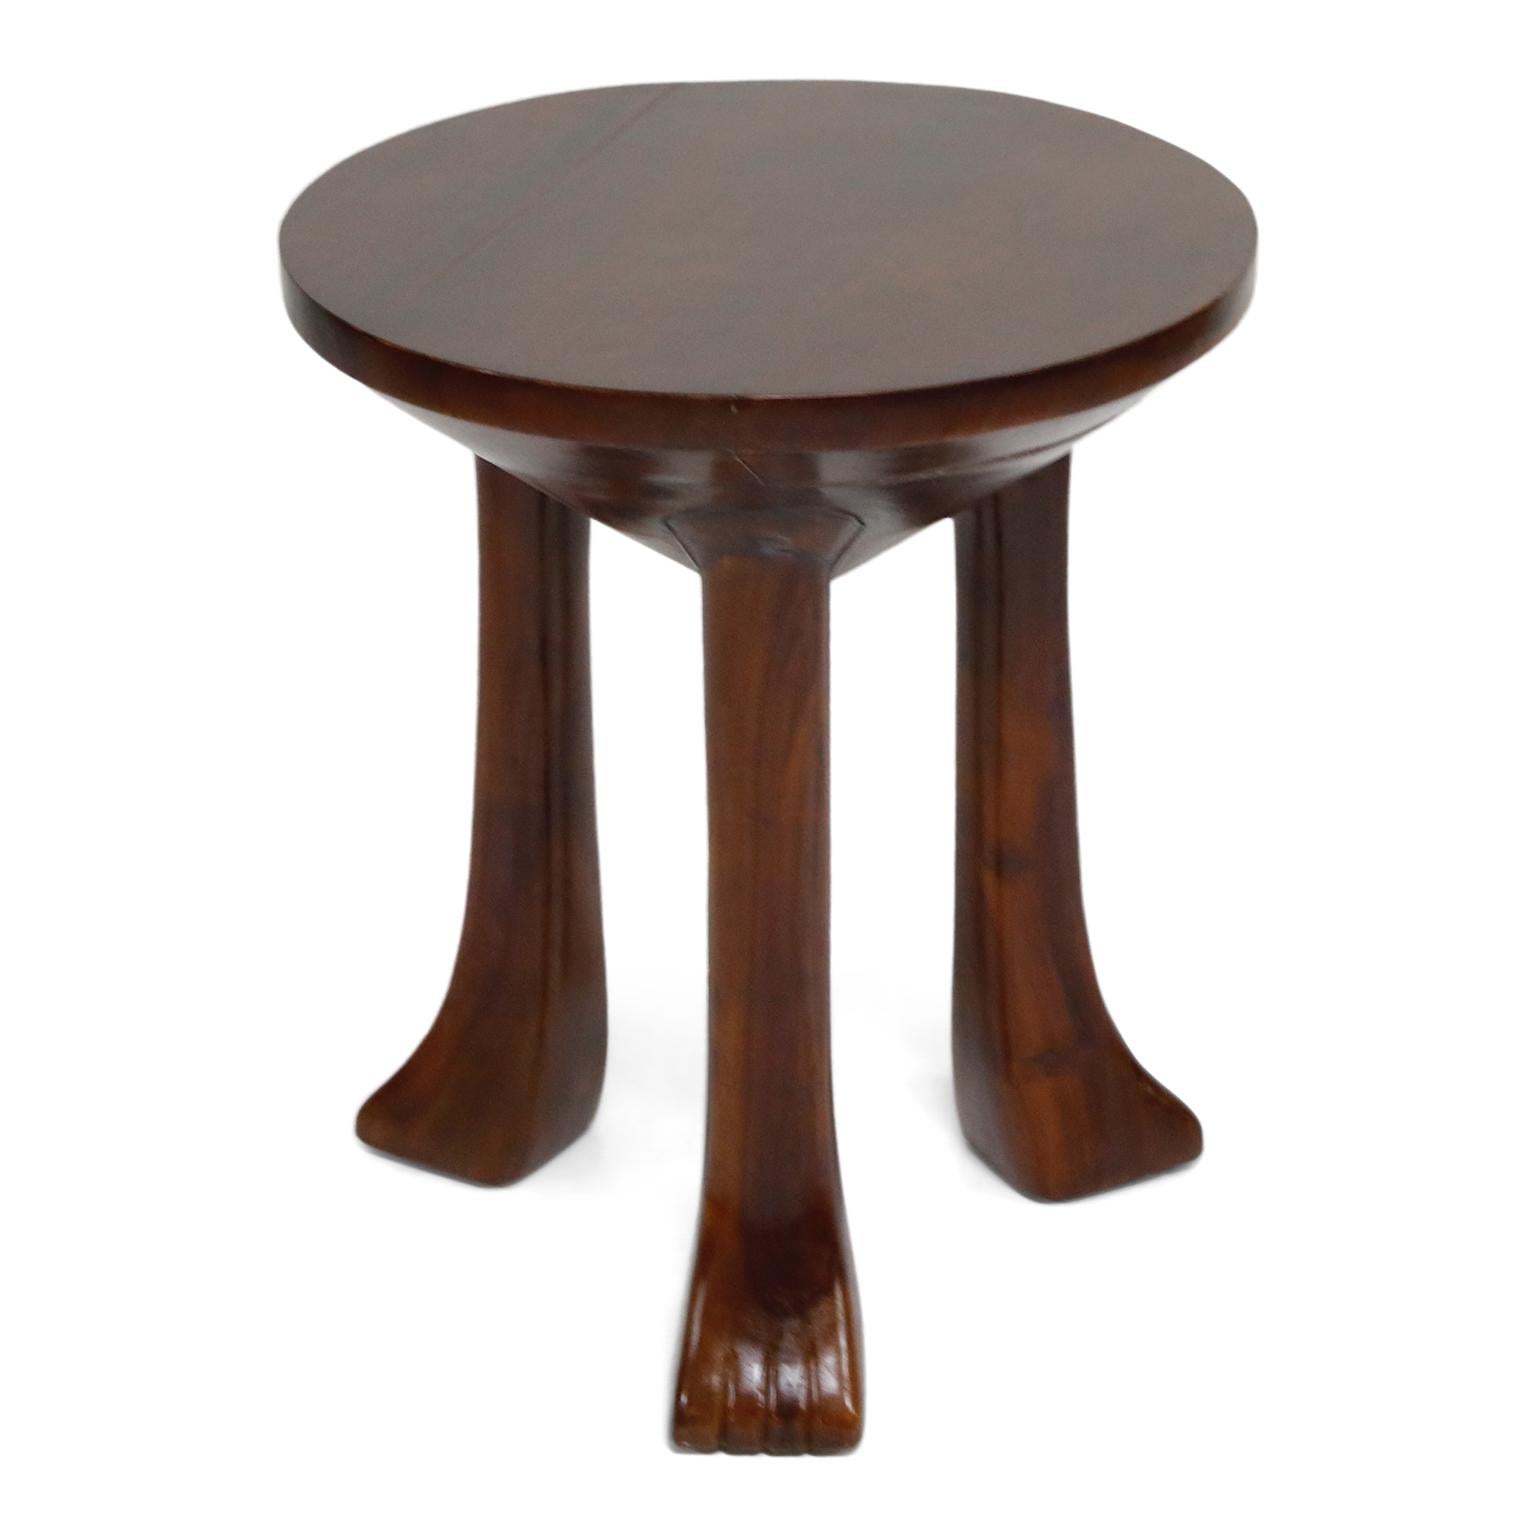 Late 20th Century Carved Teak Three-Legged Lionfoot Side Tables in the Style of John Dickinson